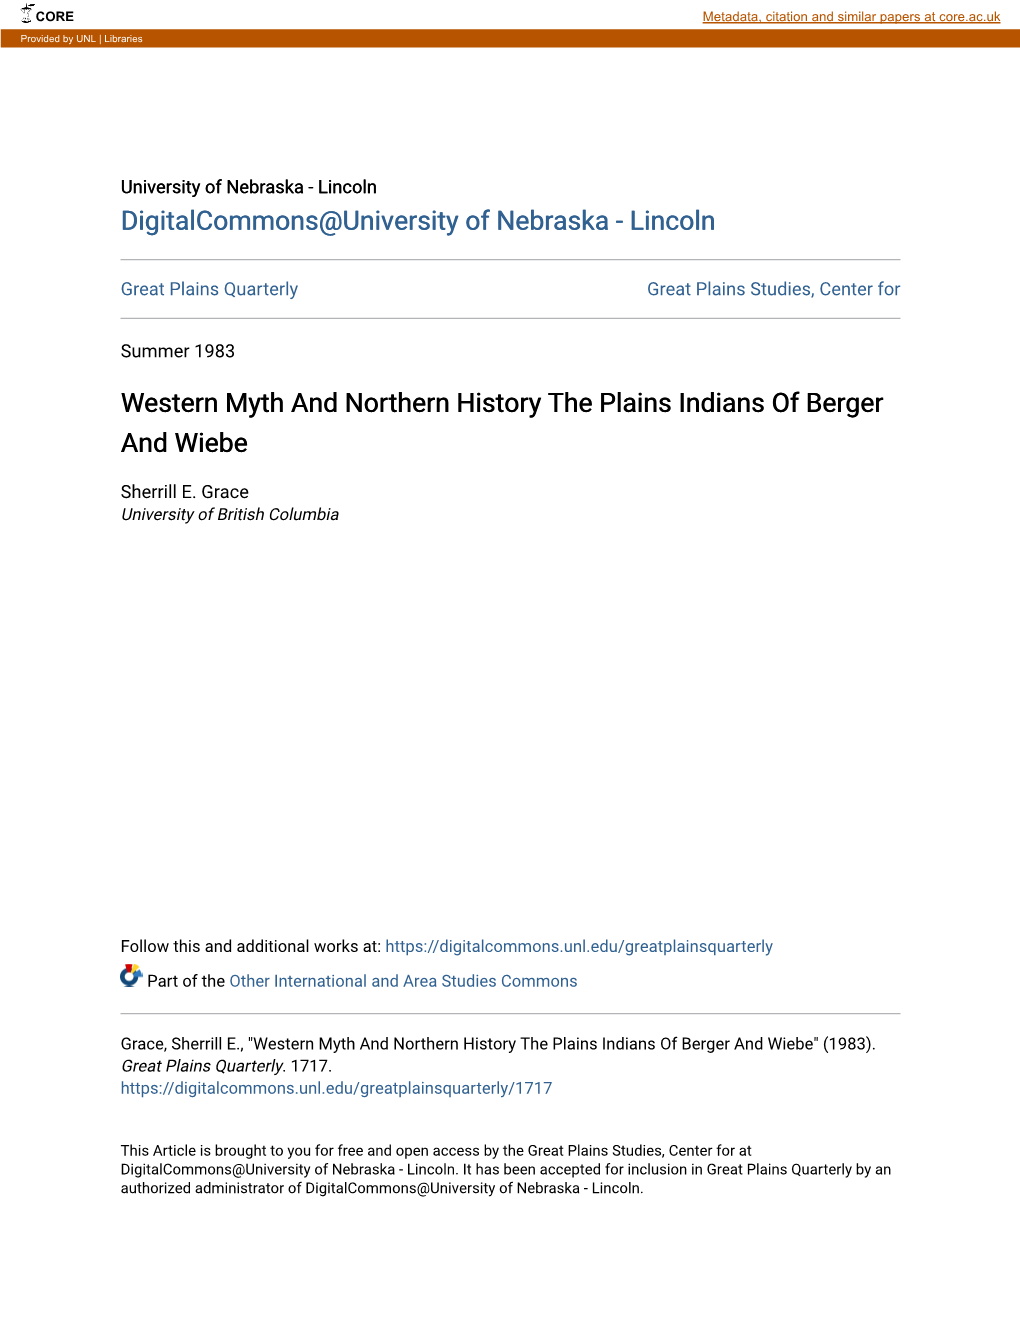 Western Myth and Northern History the Plains Indians of Berger and Wiebe